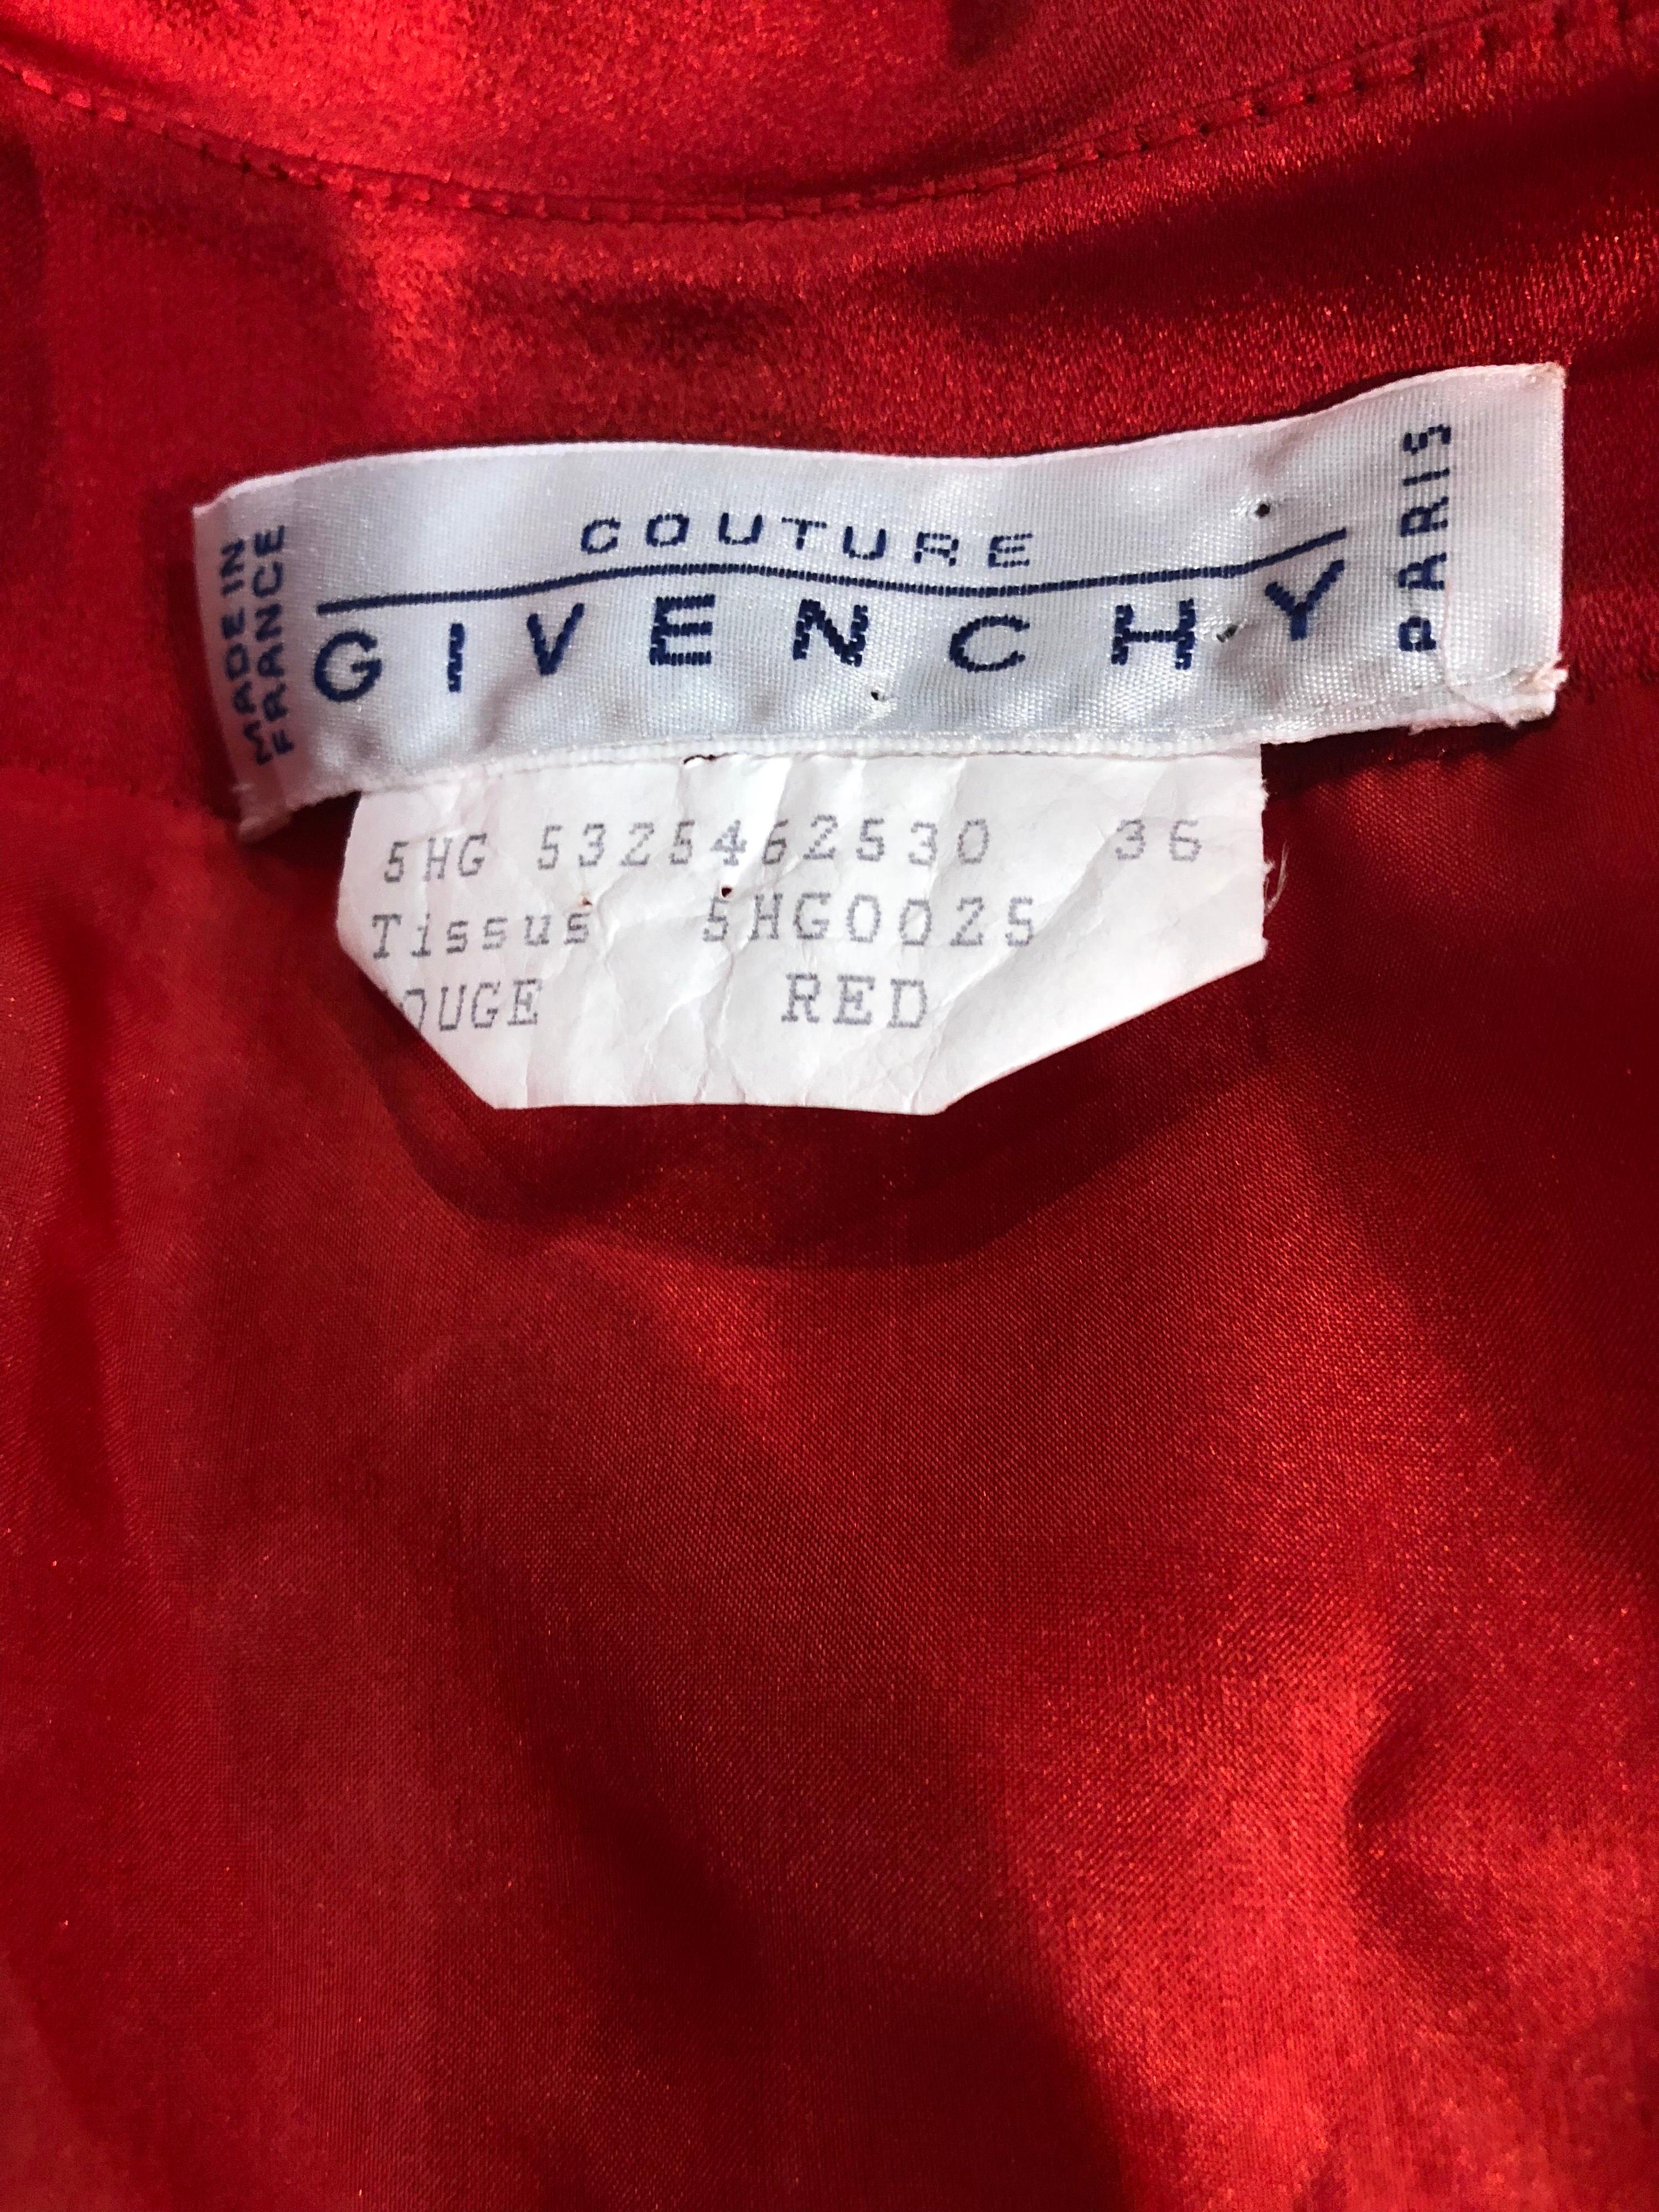 Vintage Givenchy Couture by Alexander McQueen Sz 36 Lipstick Red Silk Cape Dress For Sale 6